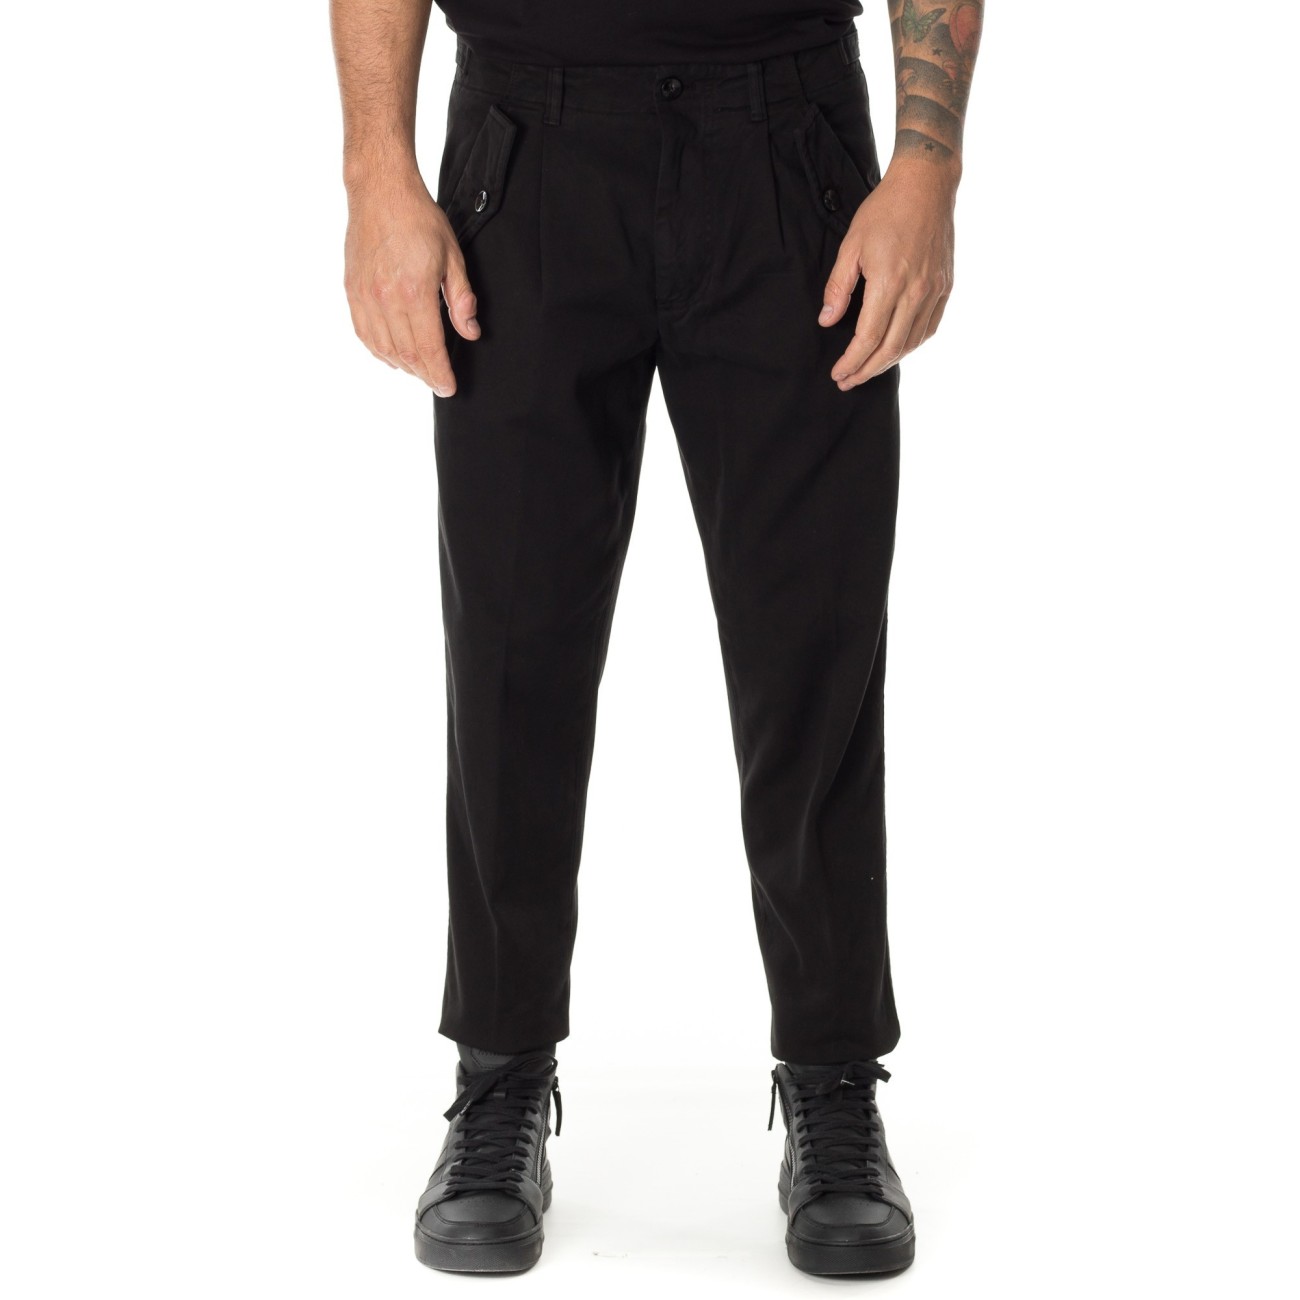 Black chino pant outfit